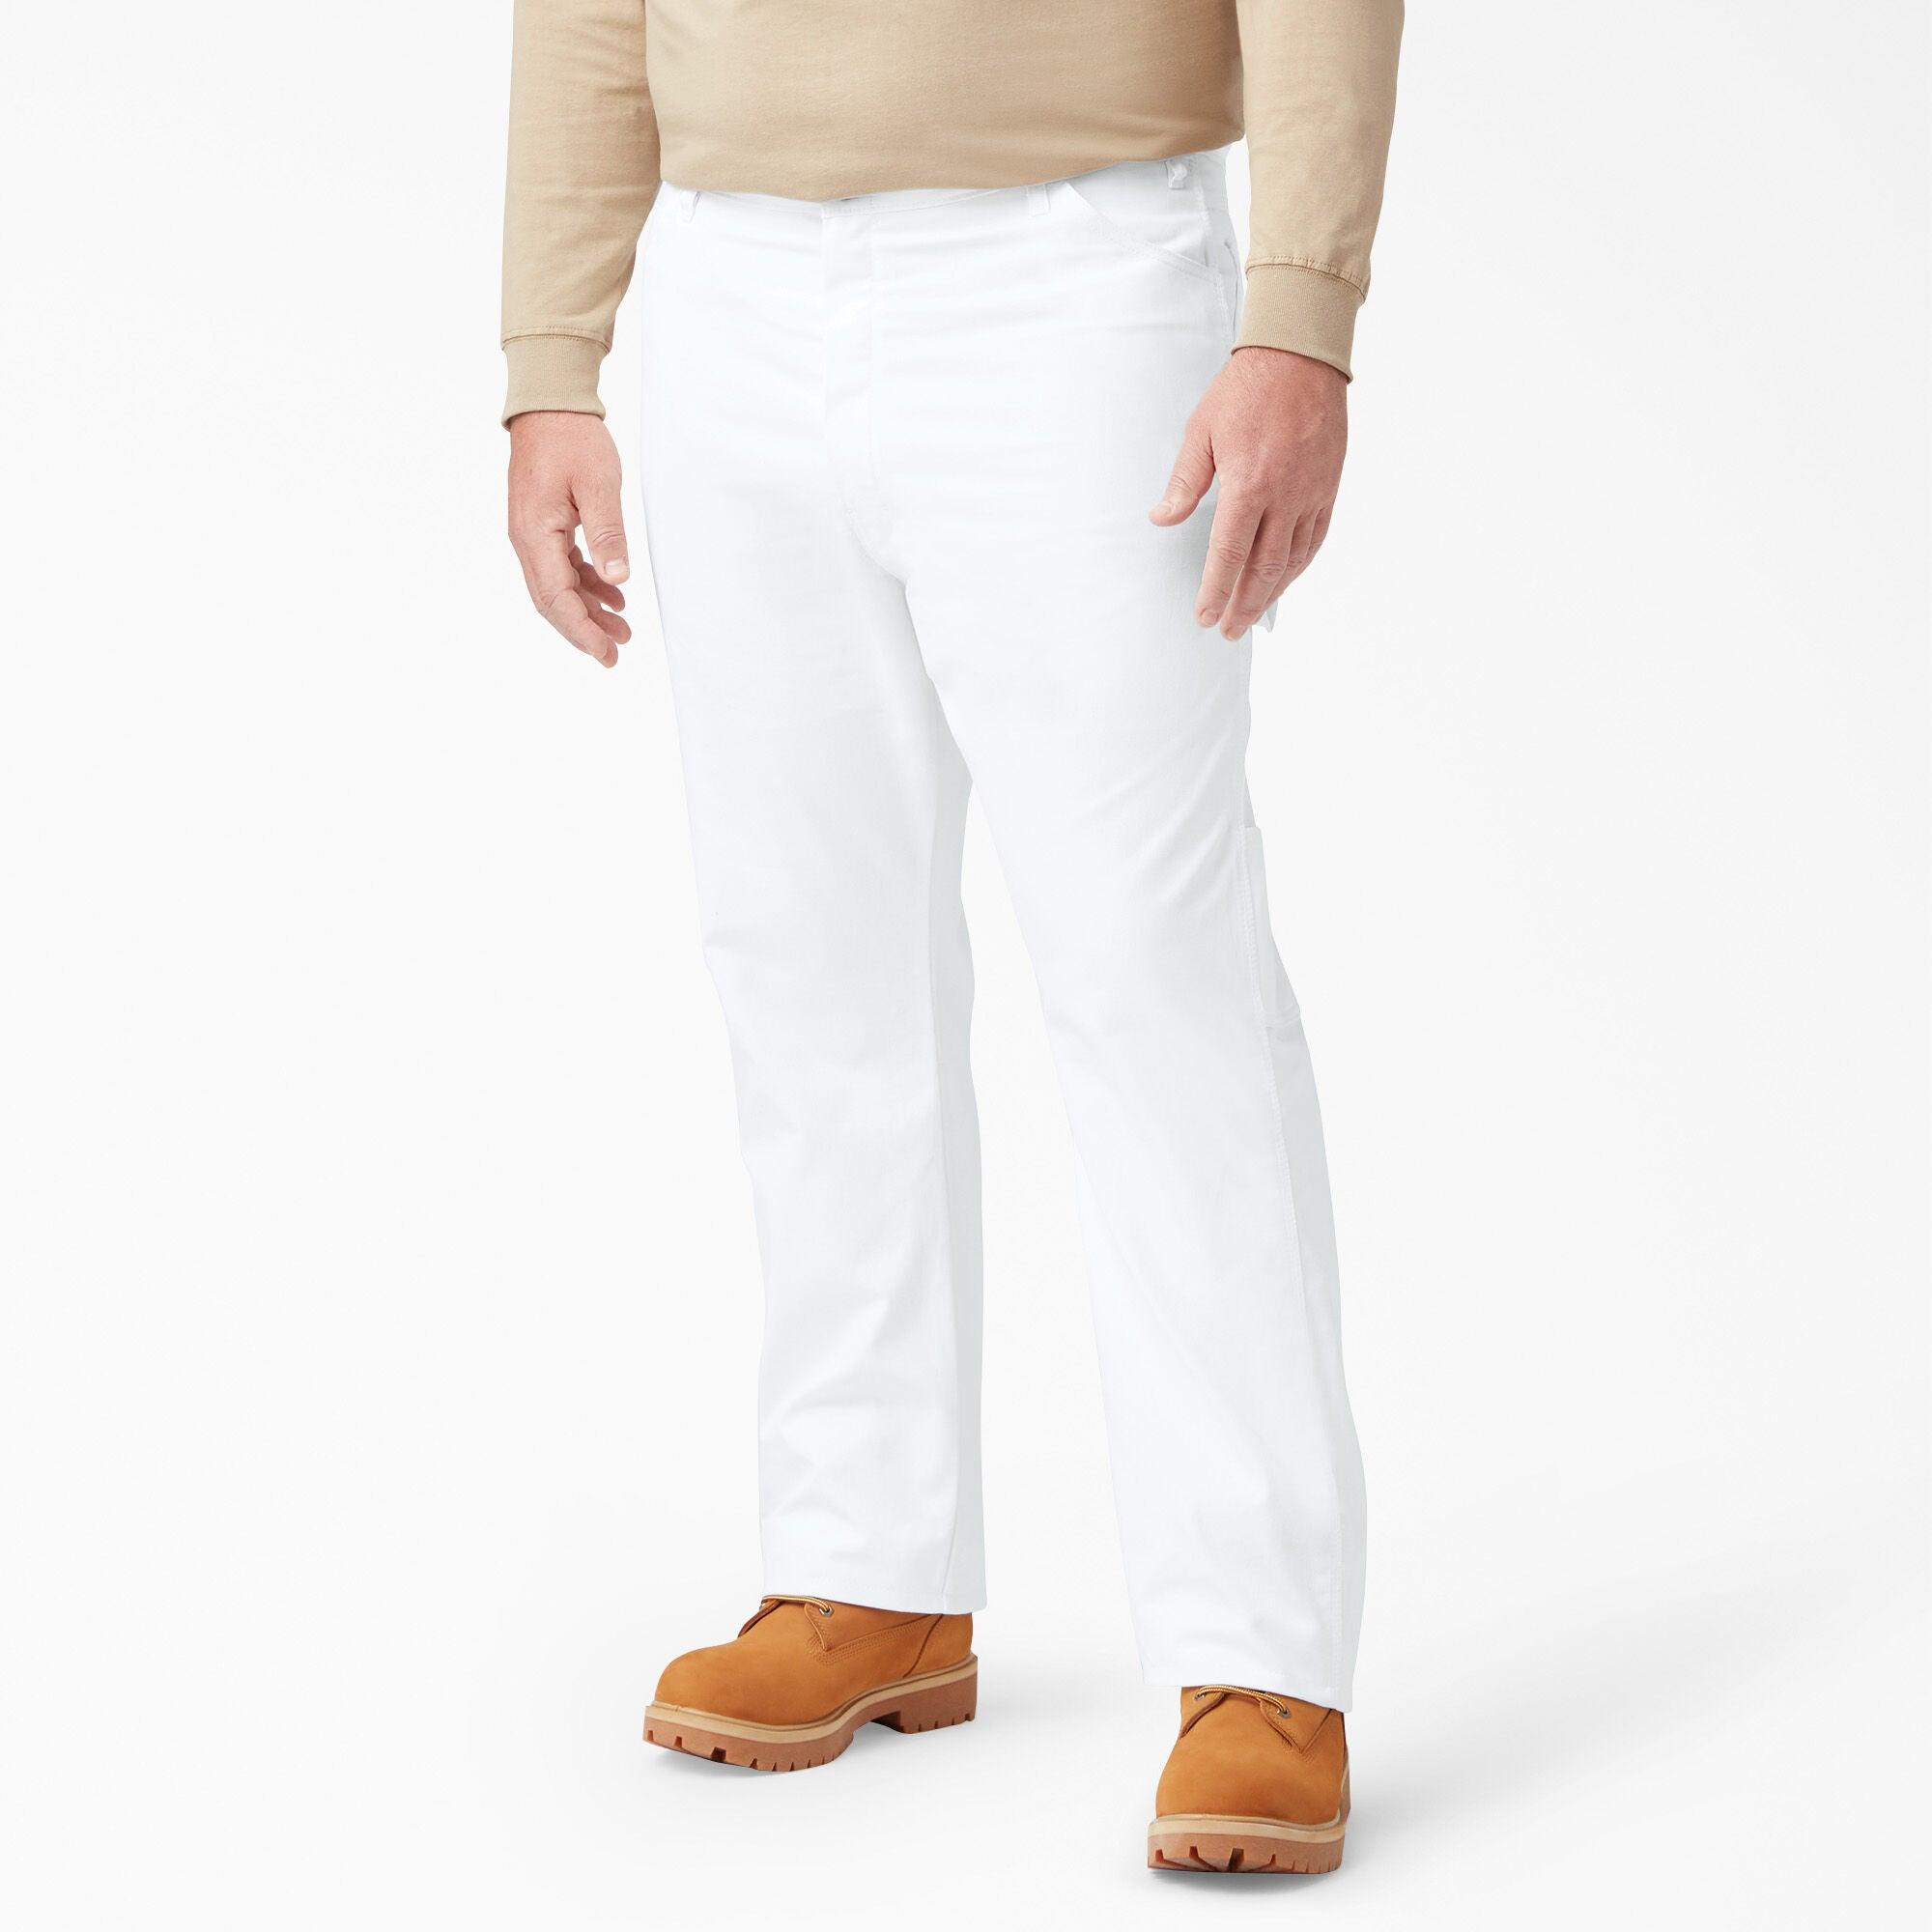 Relaxed Fit Straight Leg Painter's Pants, White - Purpose-Built / Home of the Trades